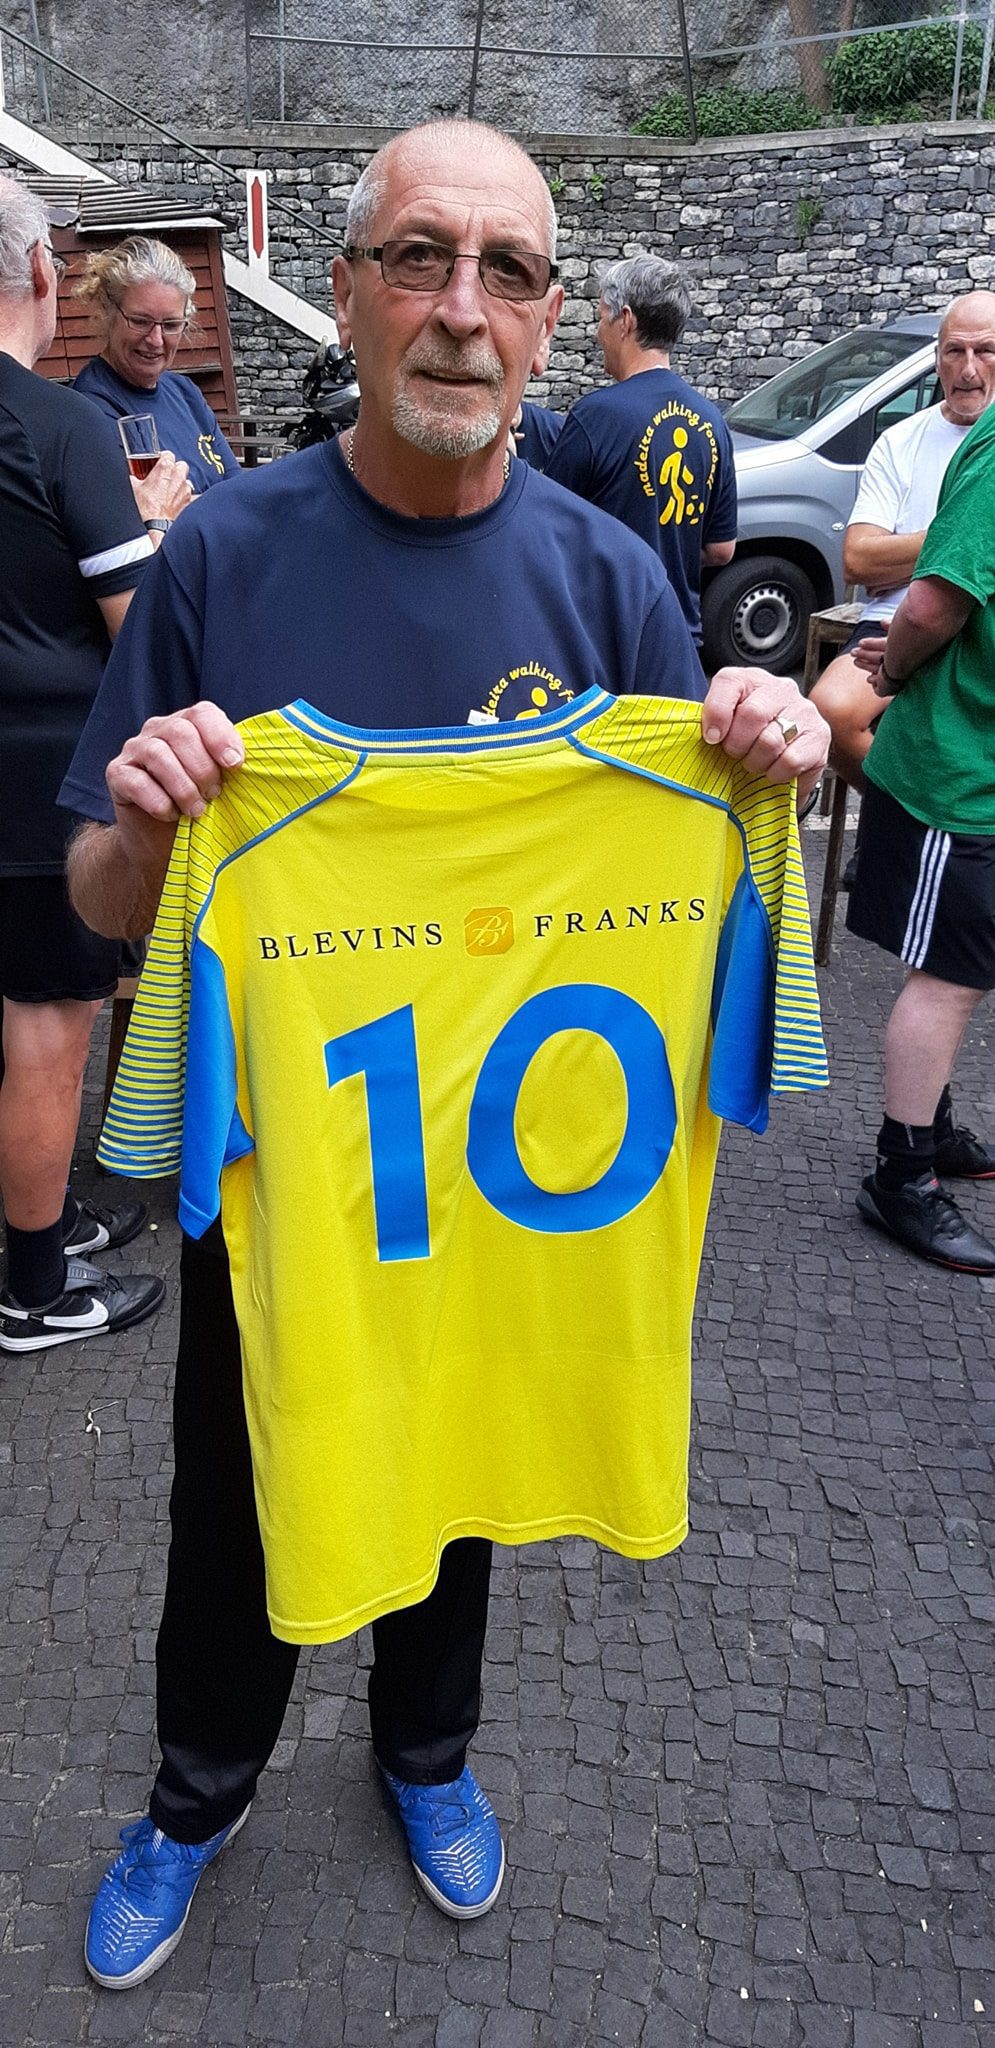 New kit and jersey sponsored by Blevins Franks.